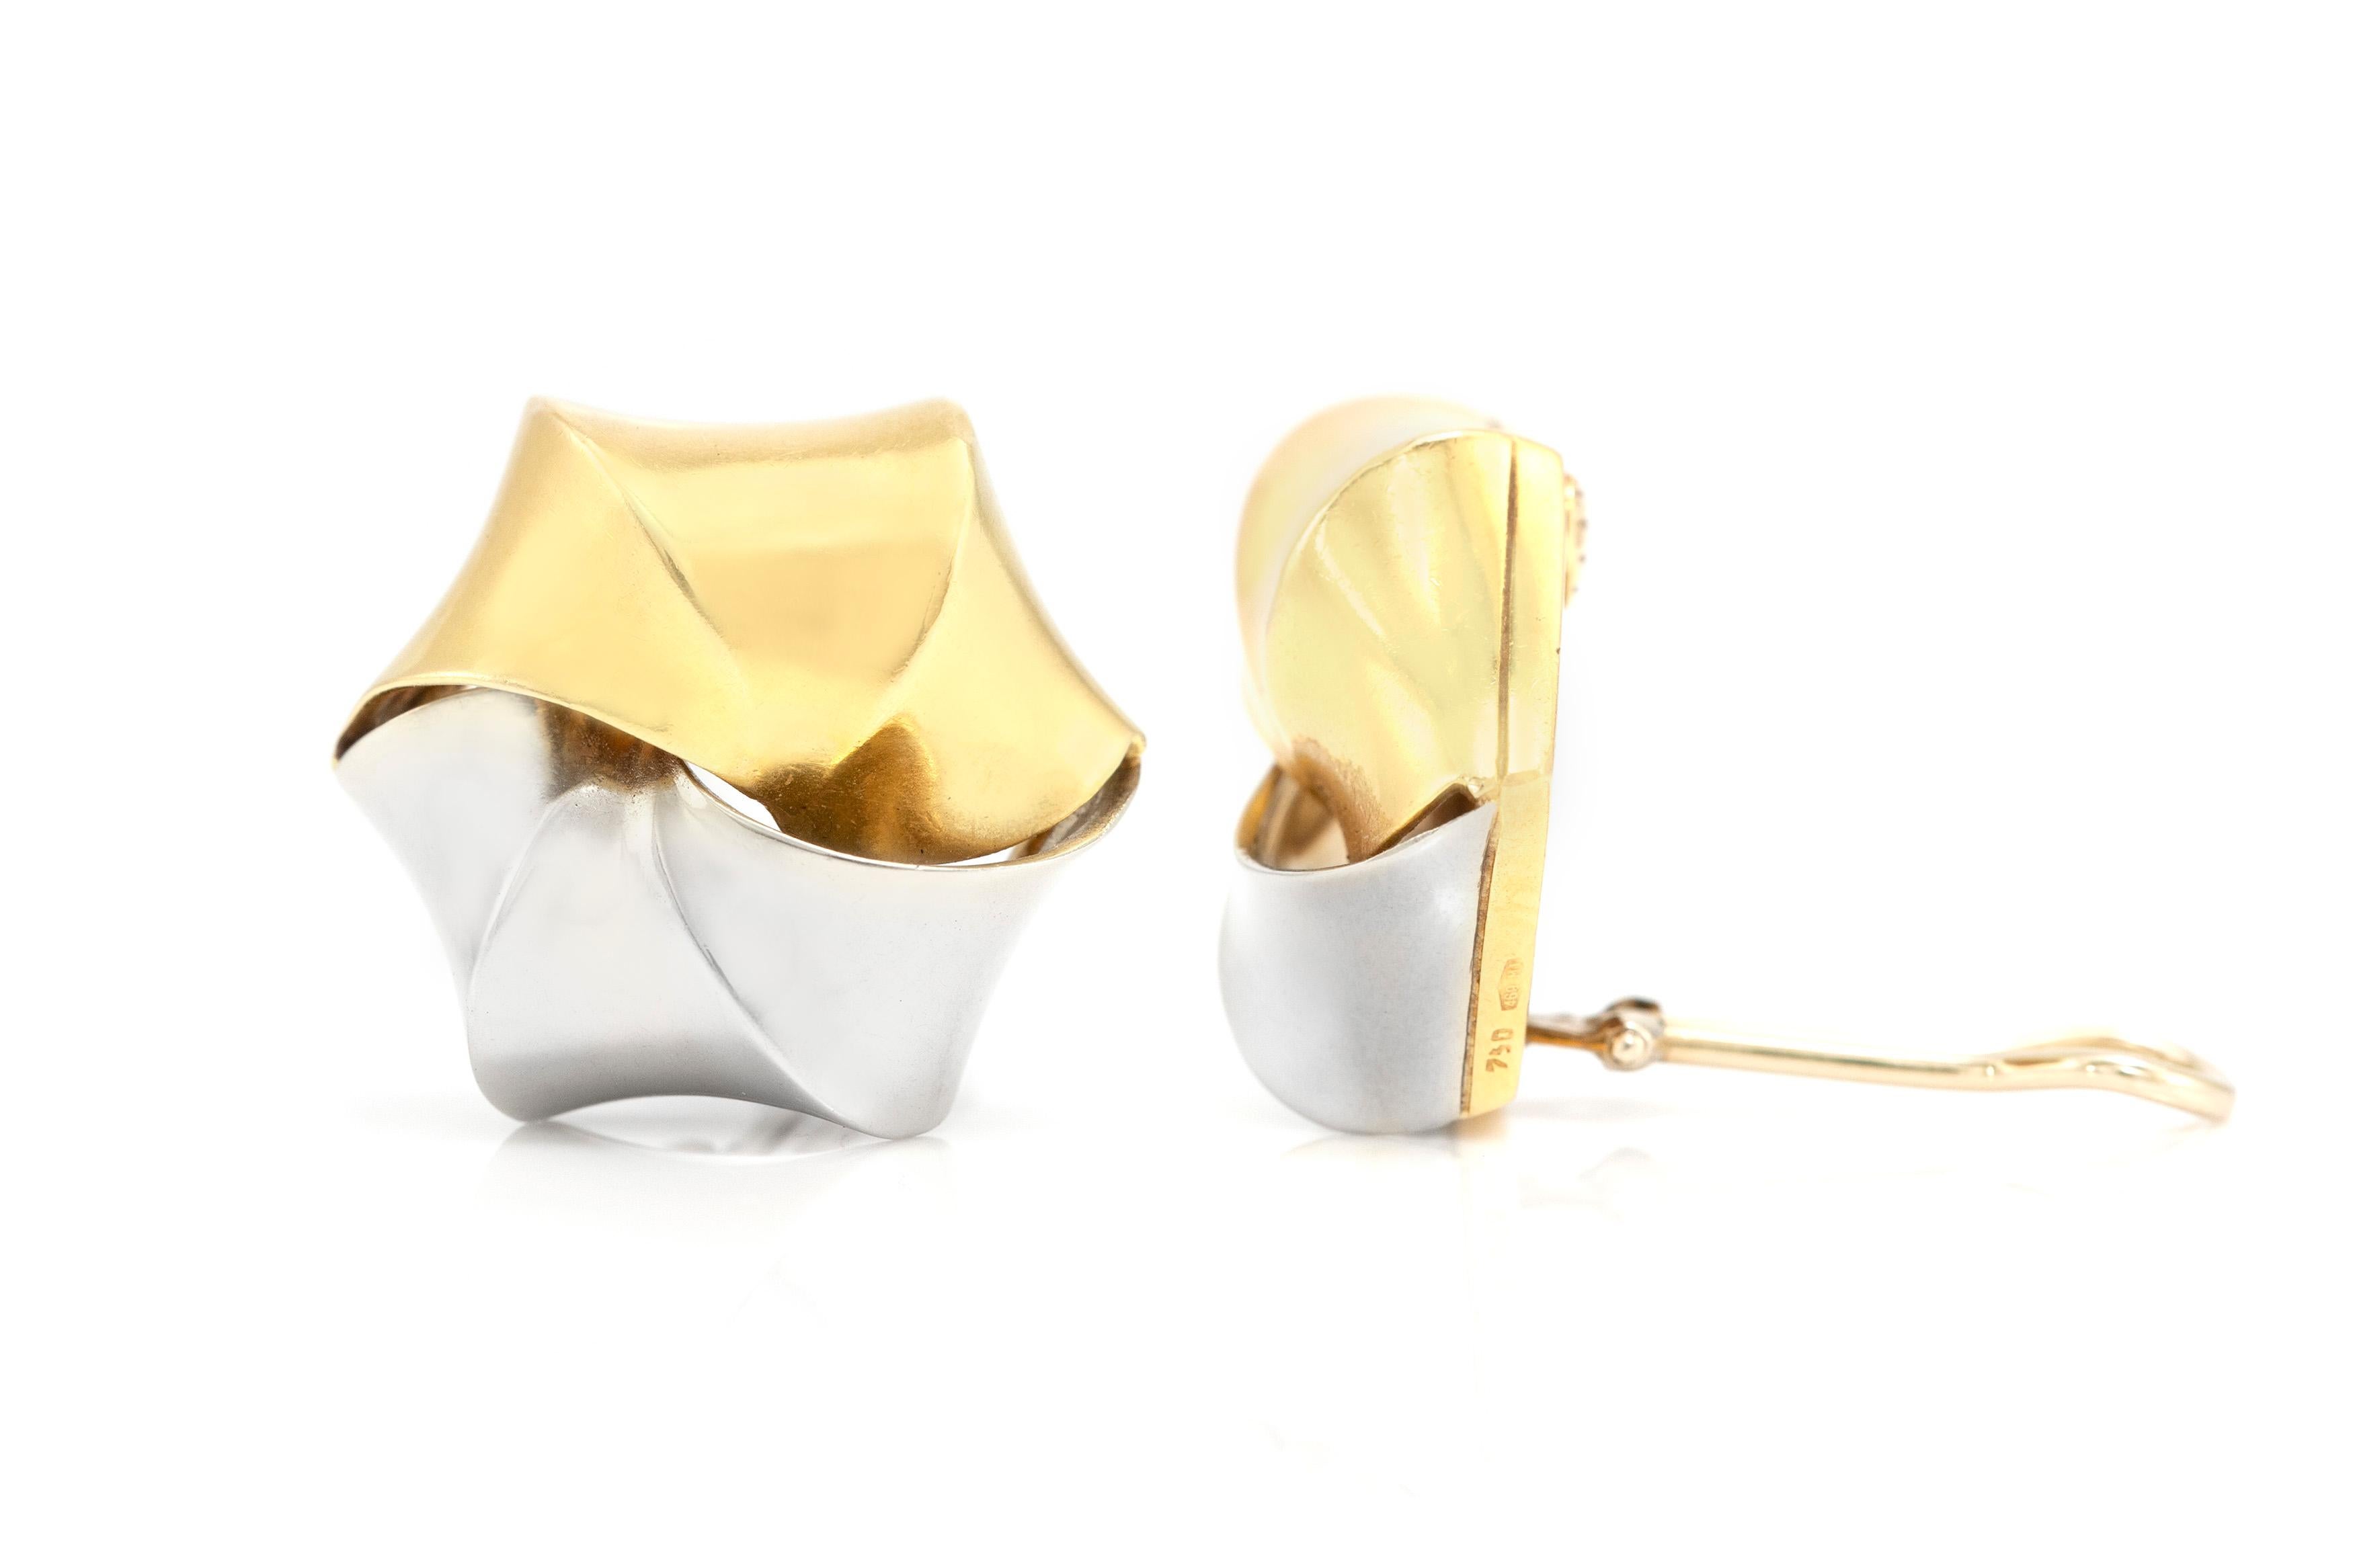 Pomellato two toned clip on earrings are finely crafted in 18K gold.